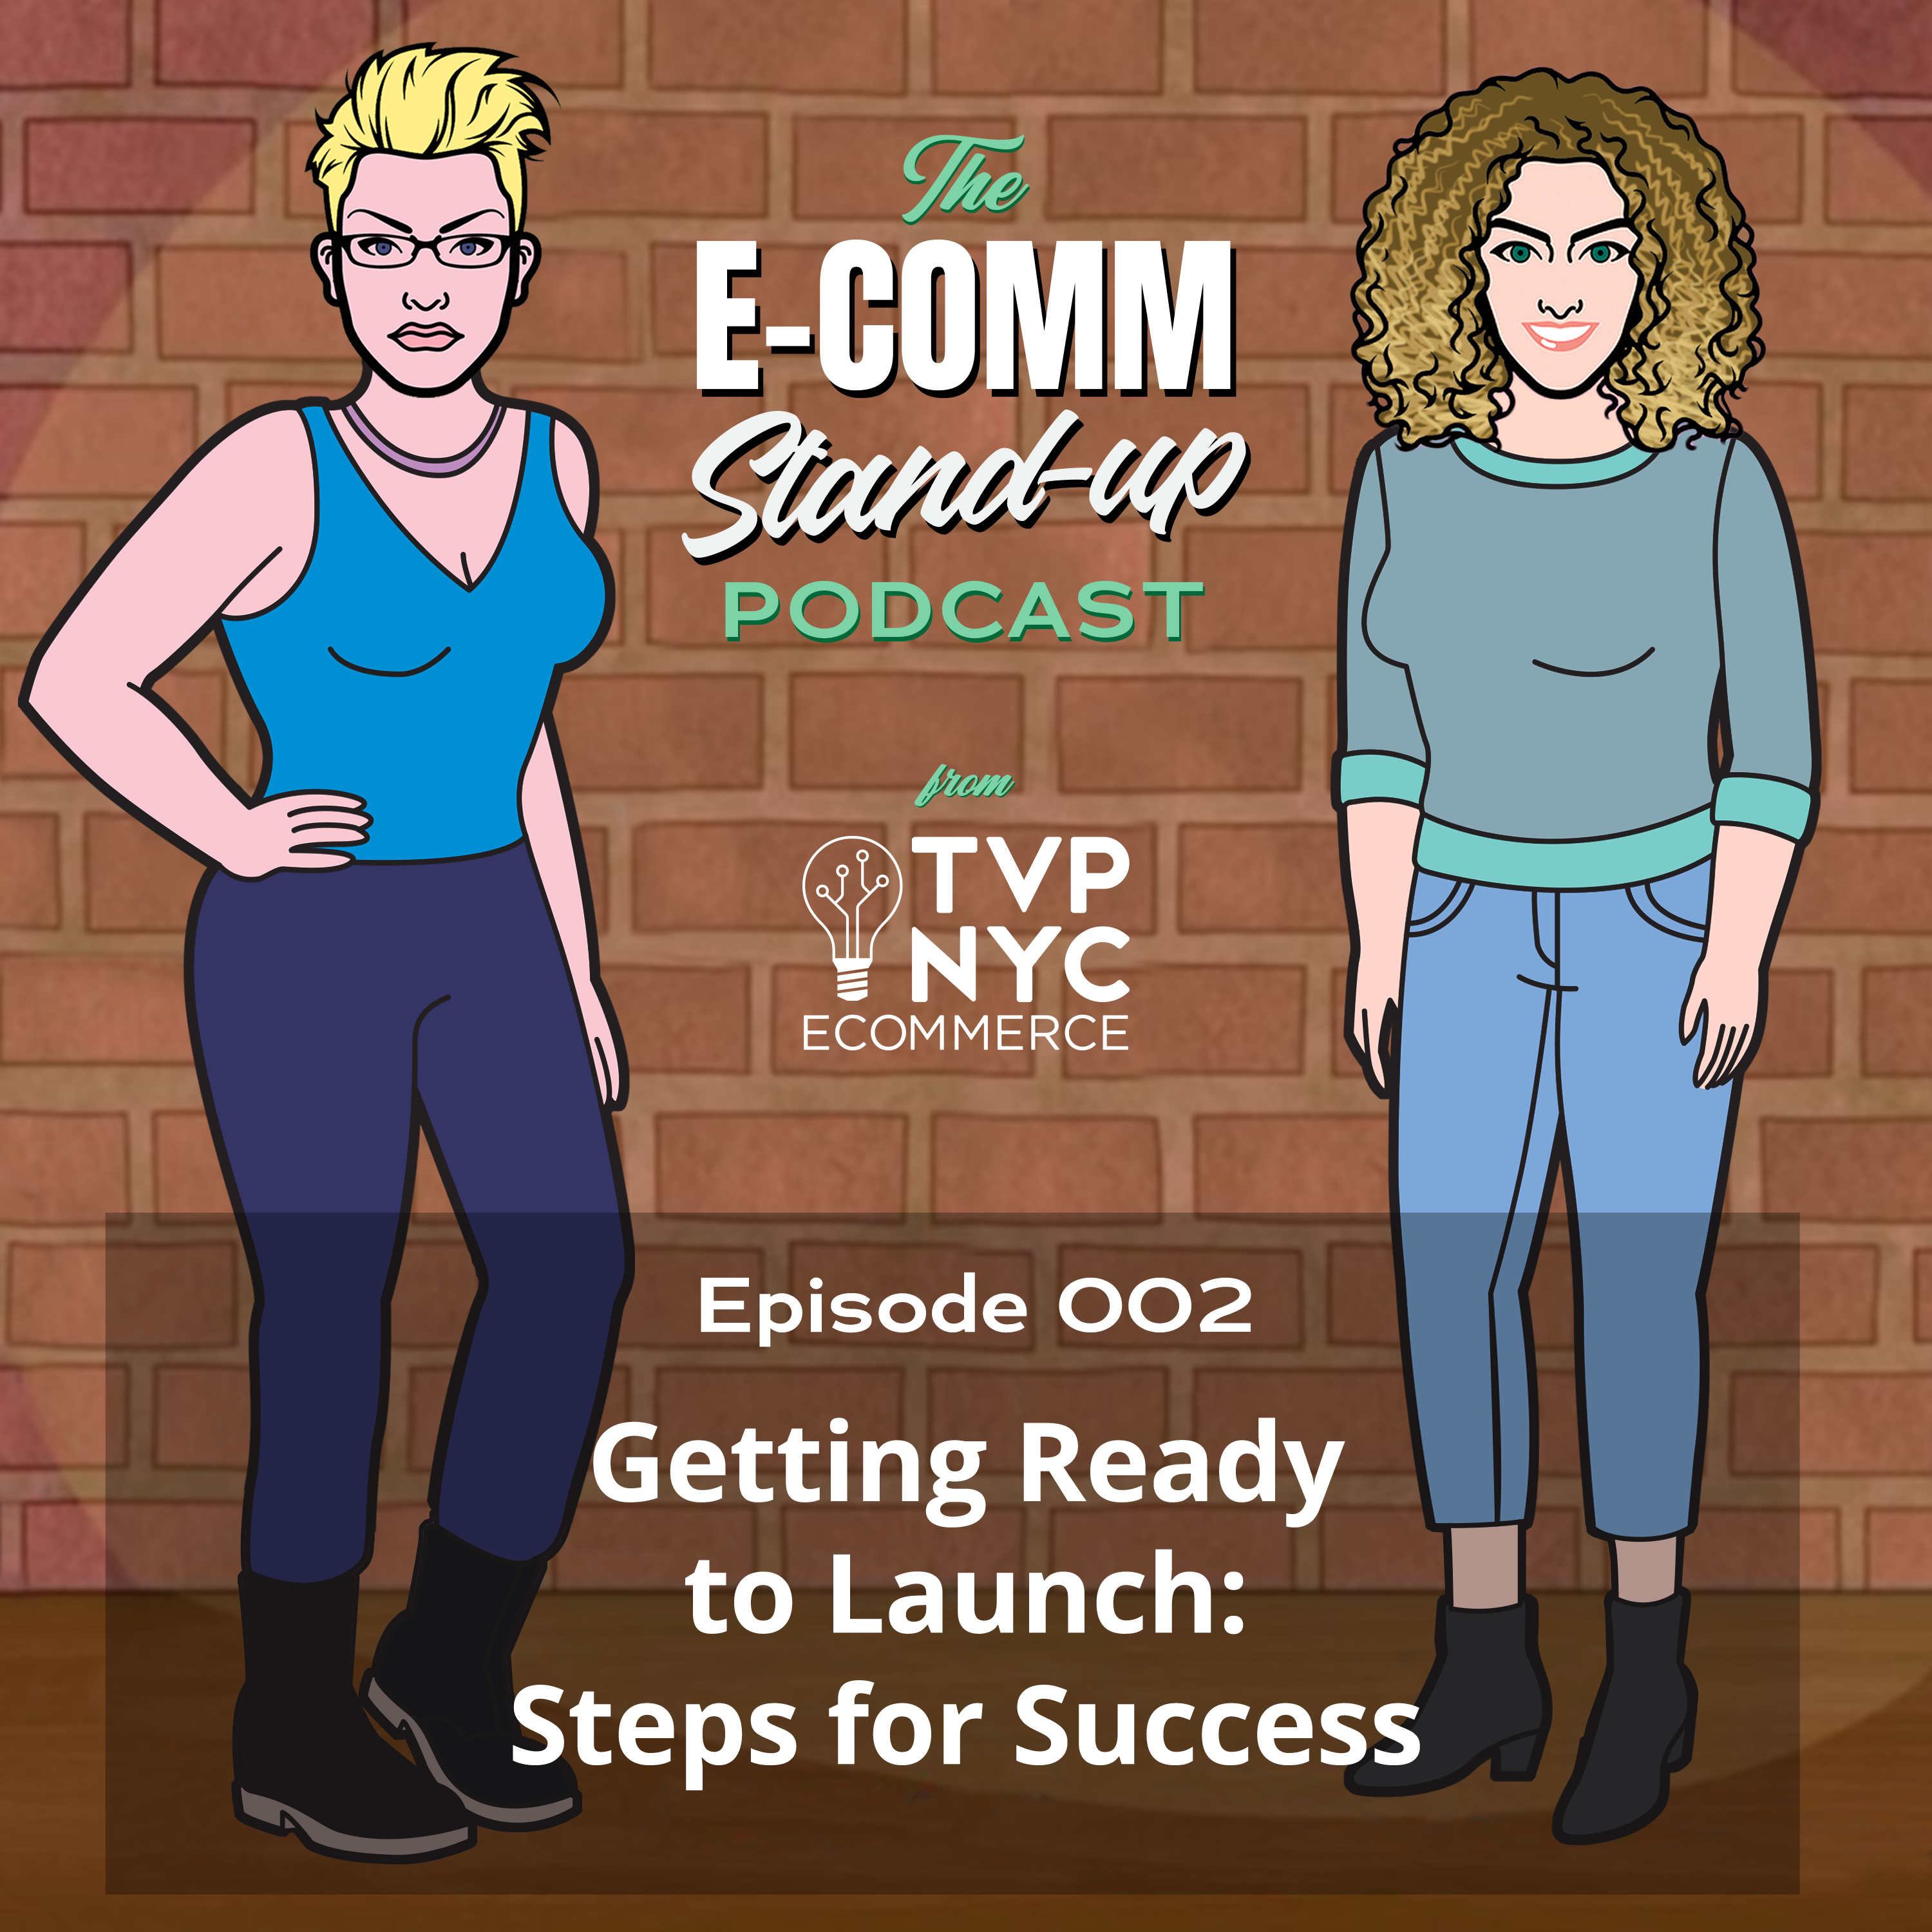 [Podcast] Getting Ready to Launch: Steps to Success